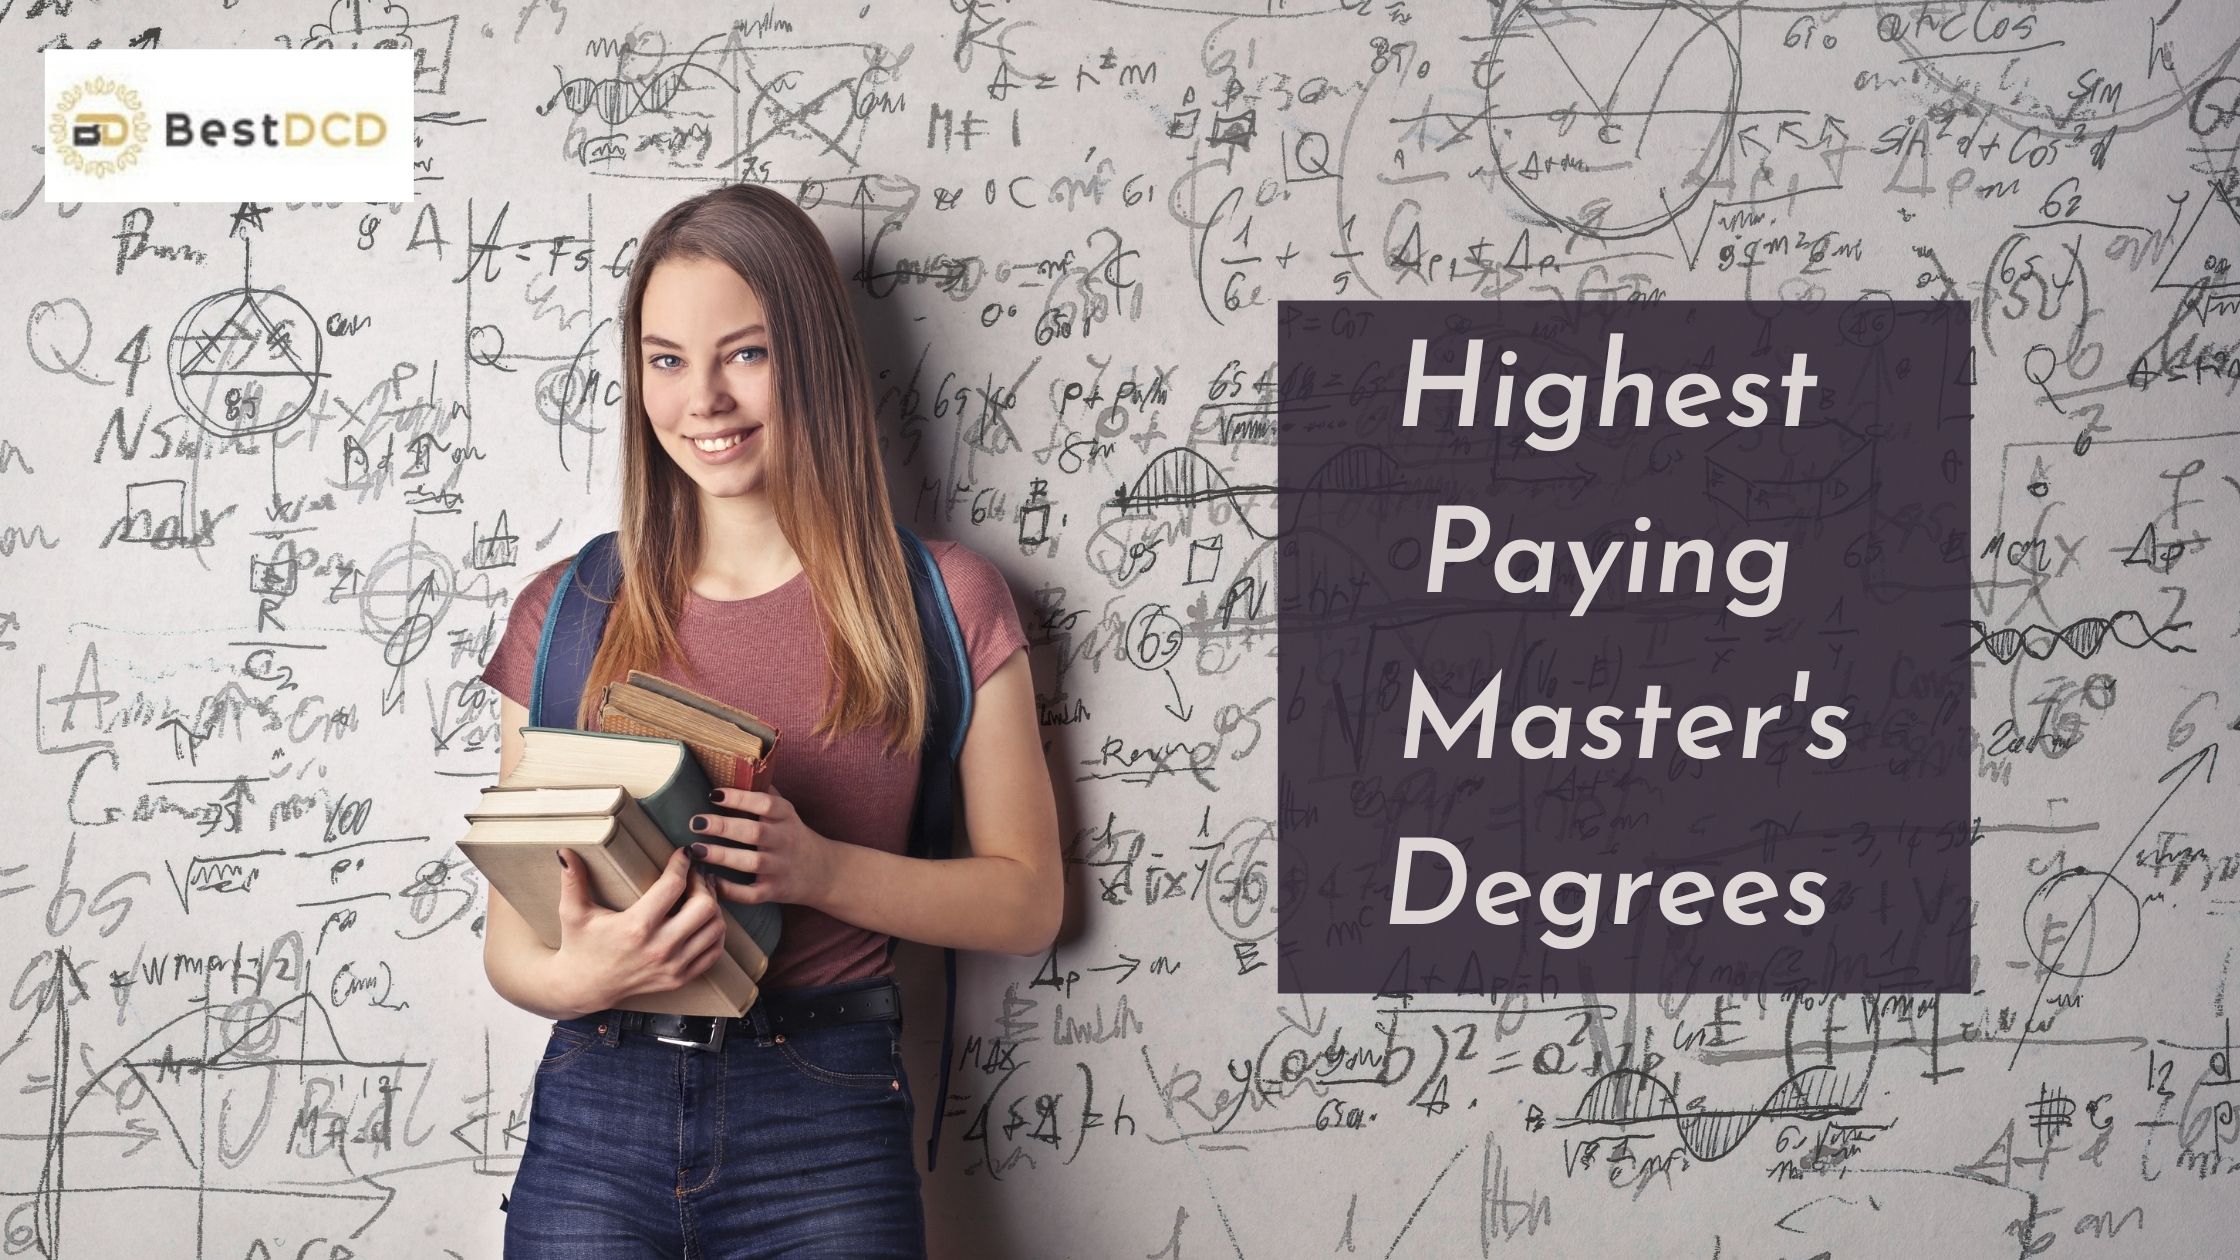 Highest Paying Master's Degrees